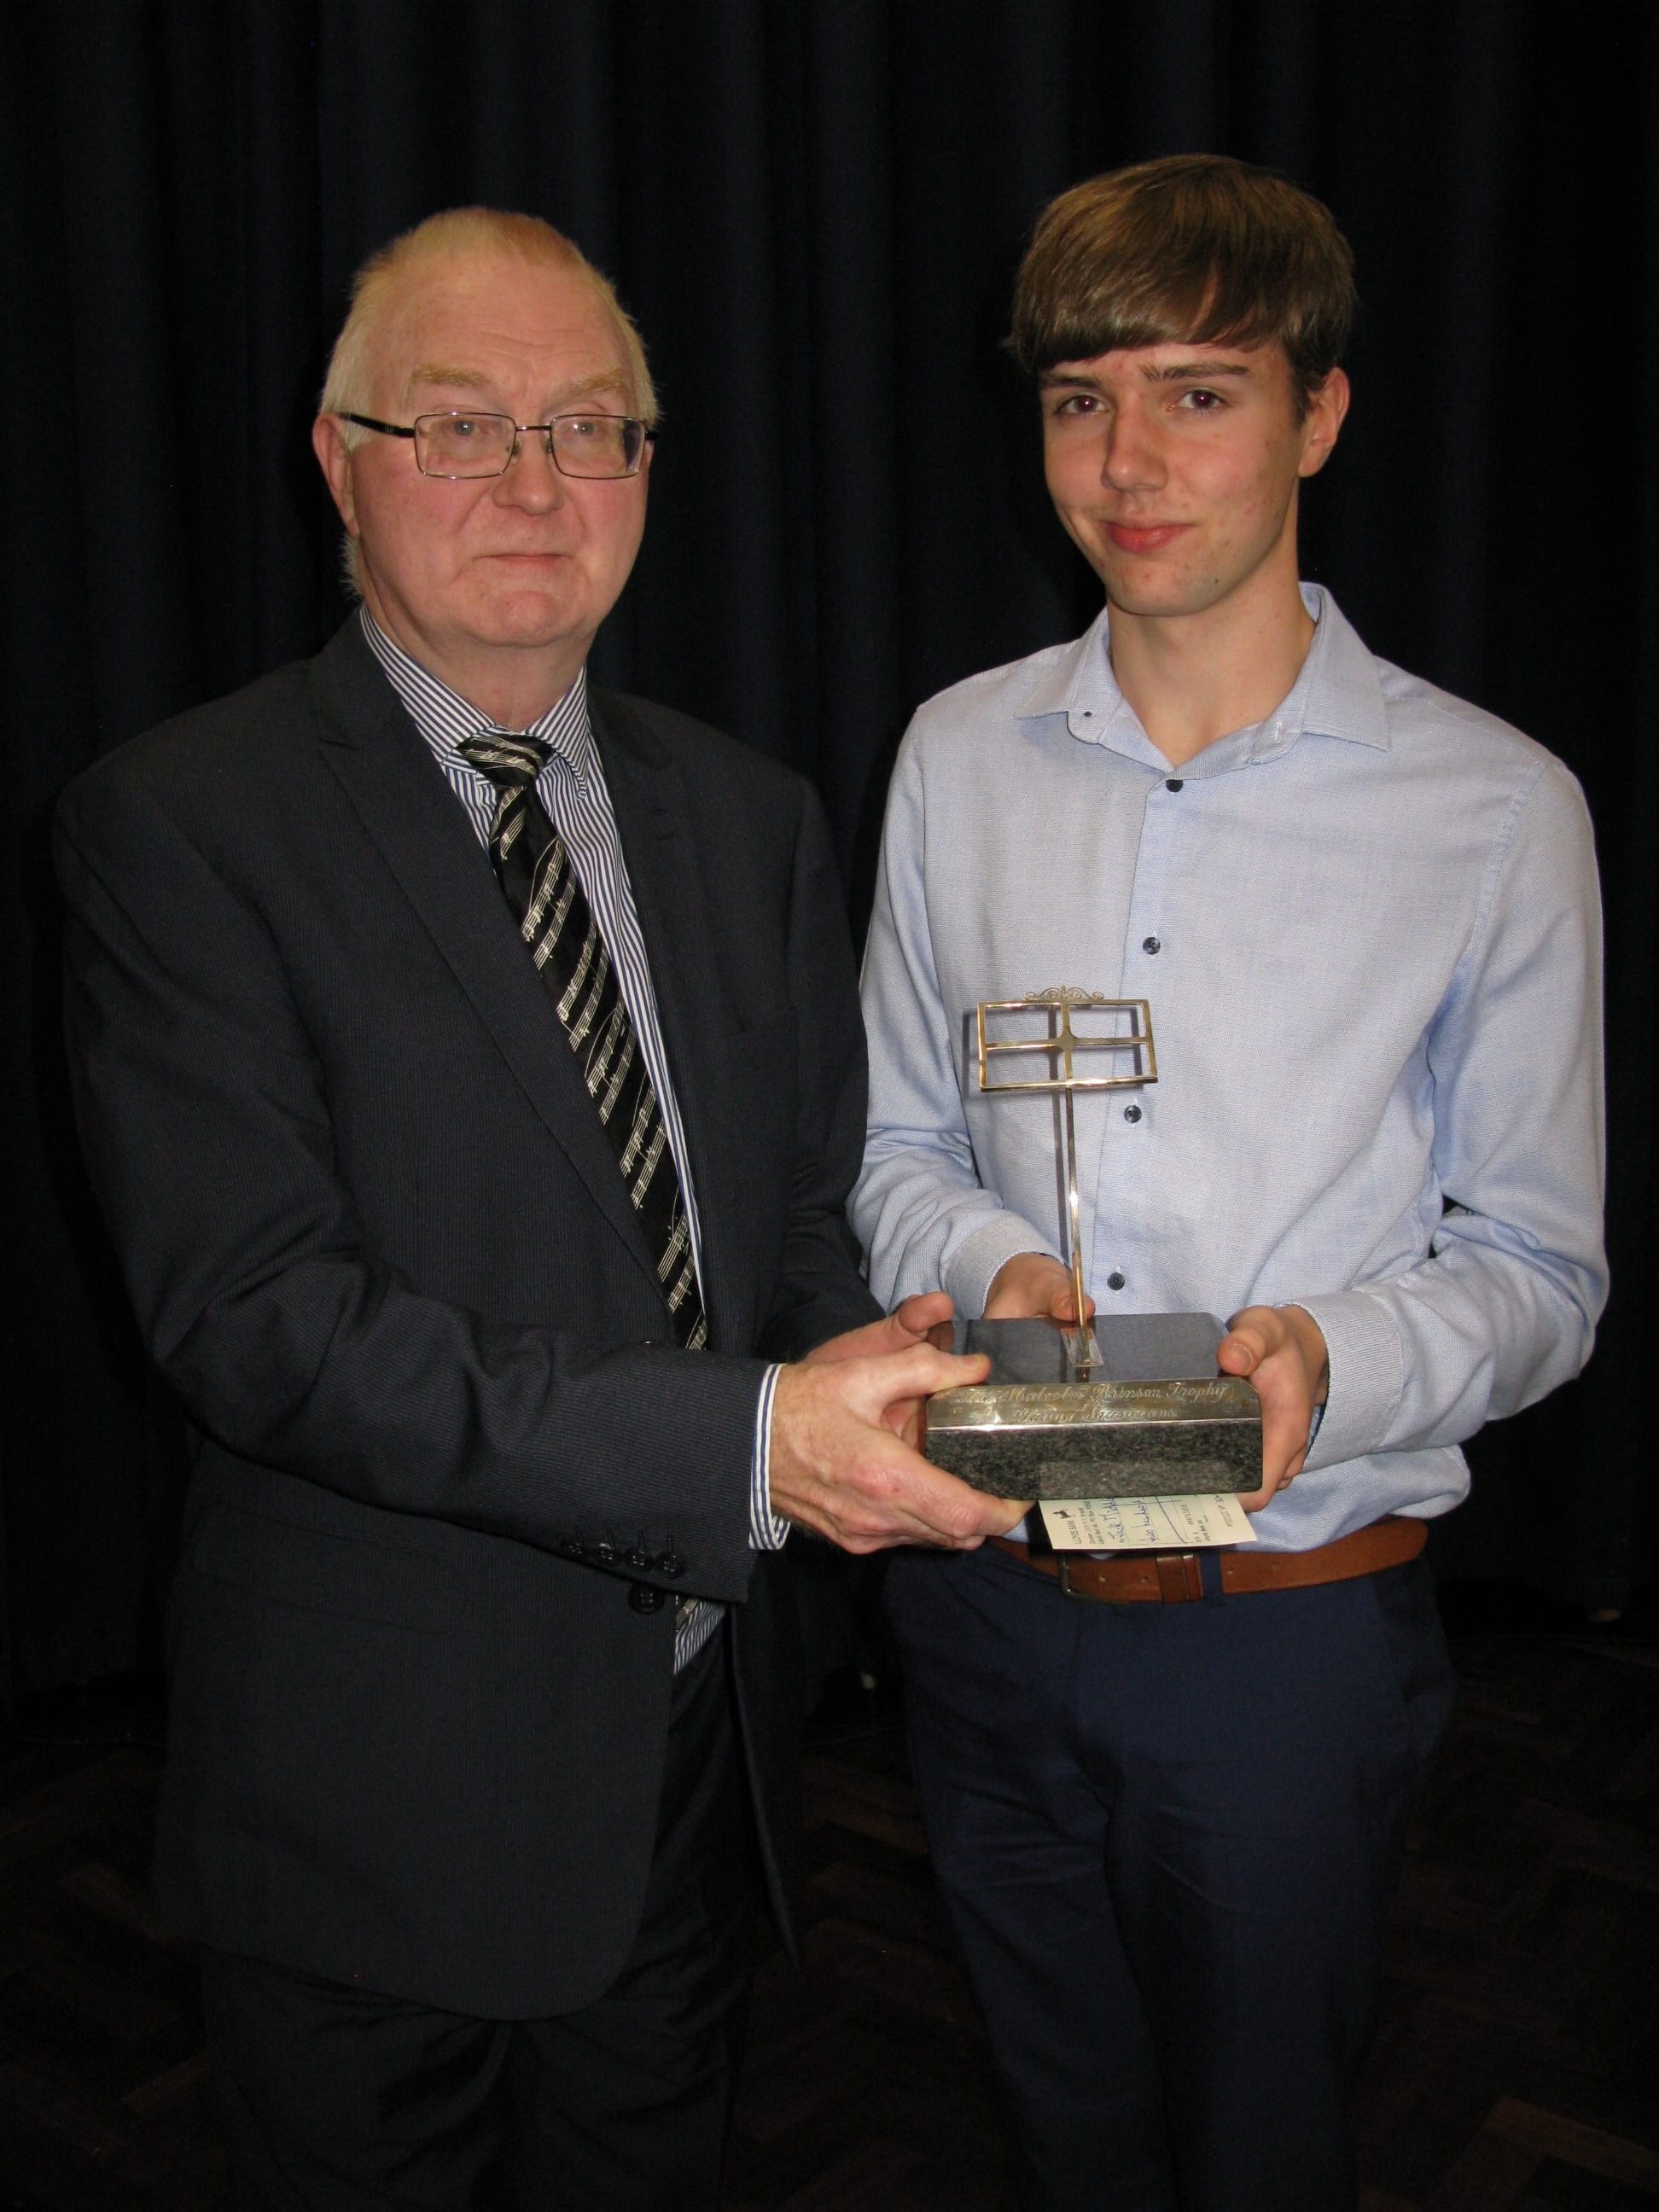 Jack with Chris Howarth presenting the trophy